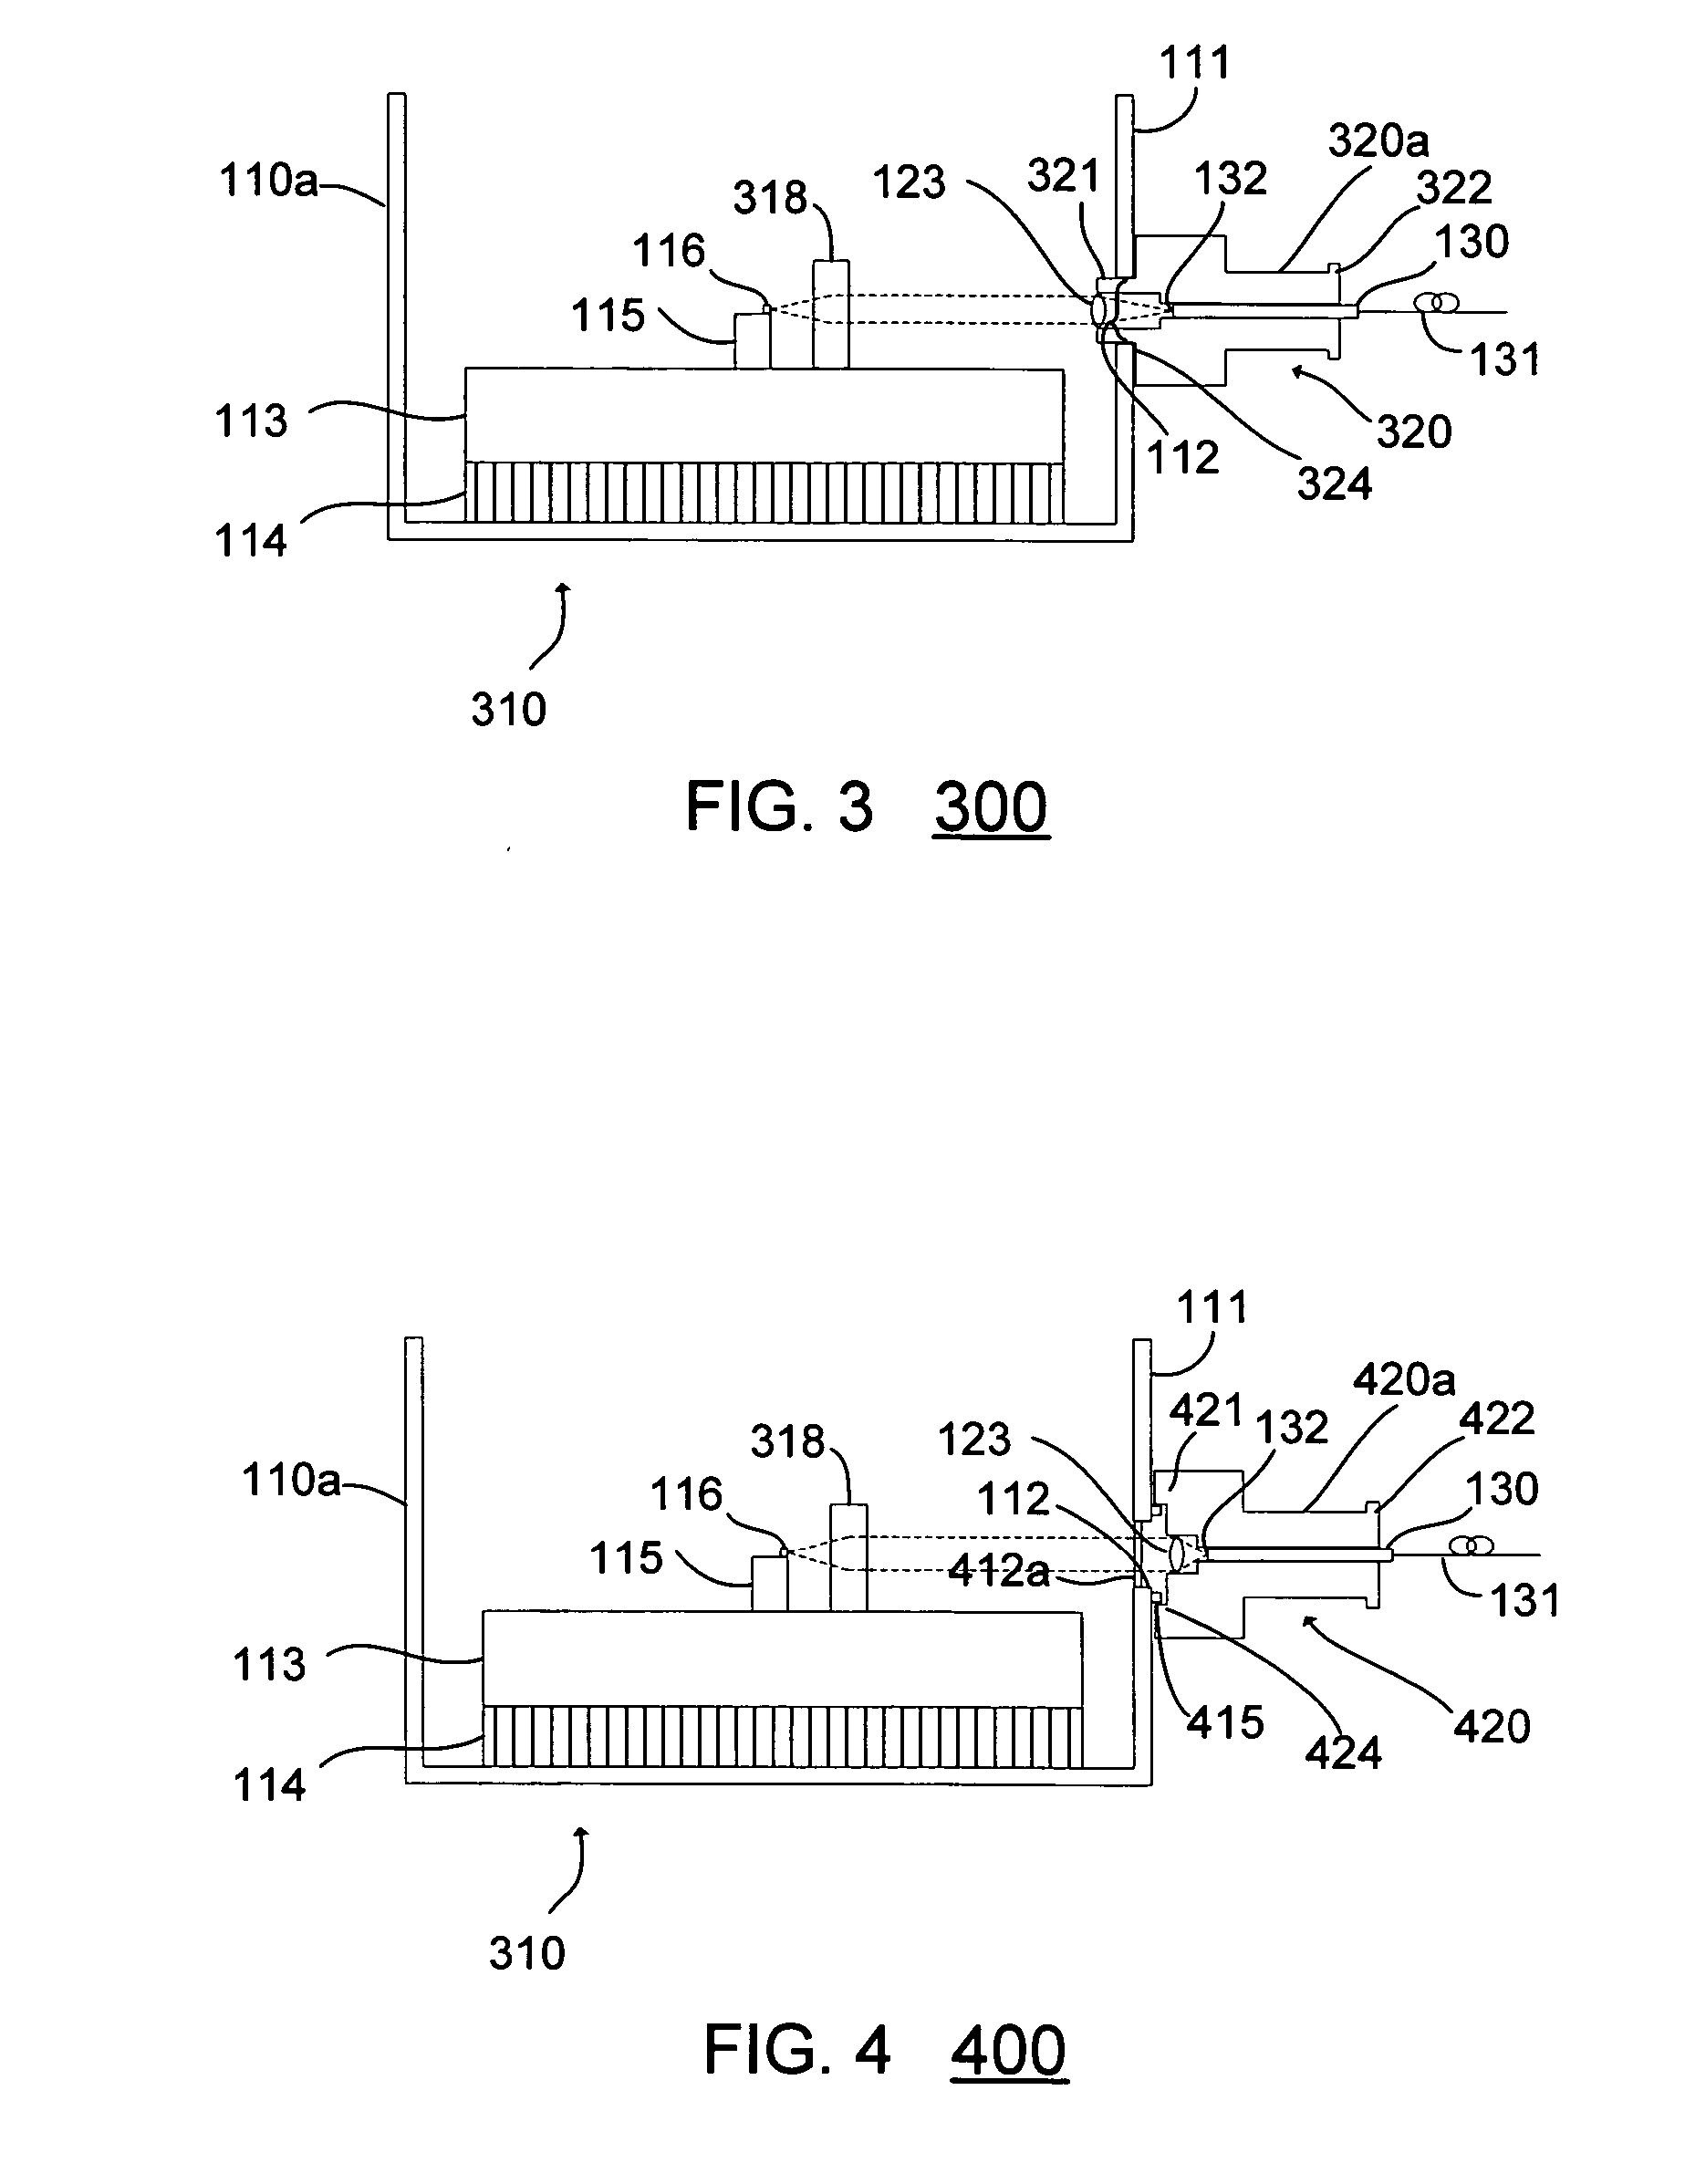 Method and apparatus for coupling a laser to a fiber in a two-lens laser system